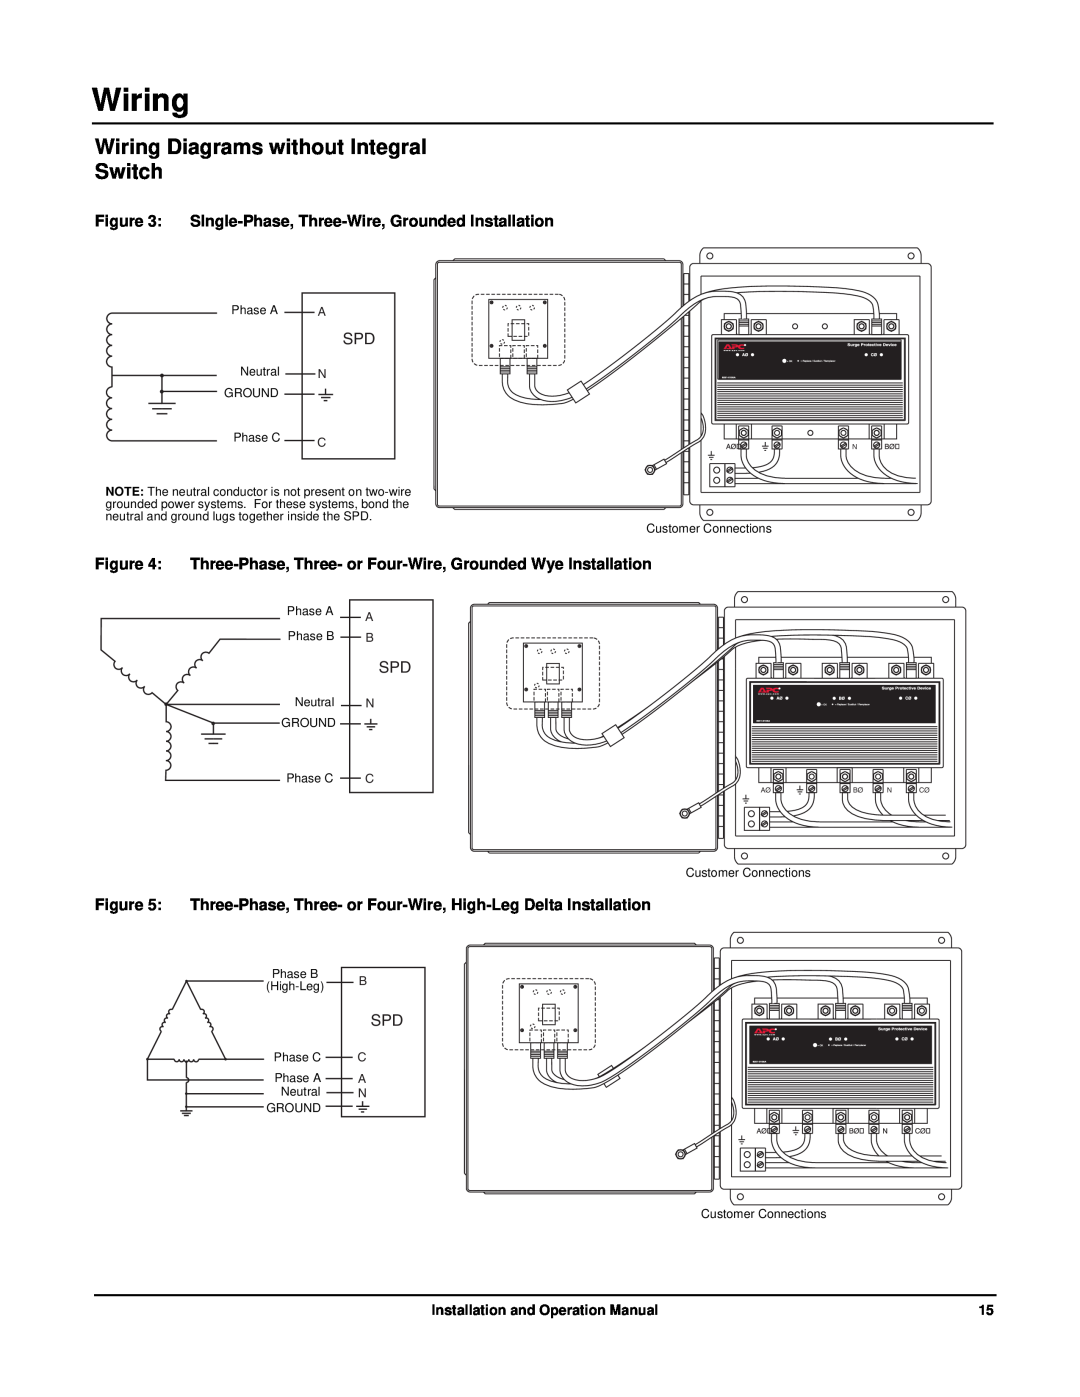 APC PML3XS-B, PMP3XS-B Wiring Diagrams without Integral Switch, SIngle-Phase, Three-Wire, Grounded Installation, C A N 